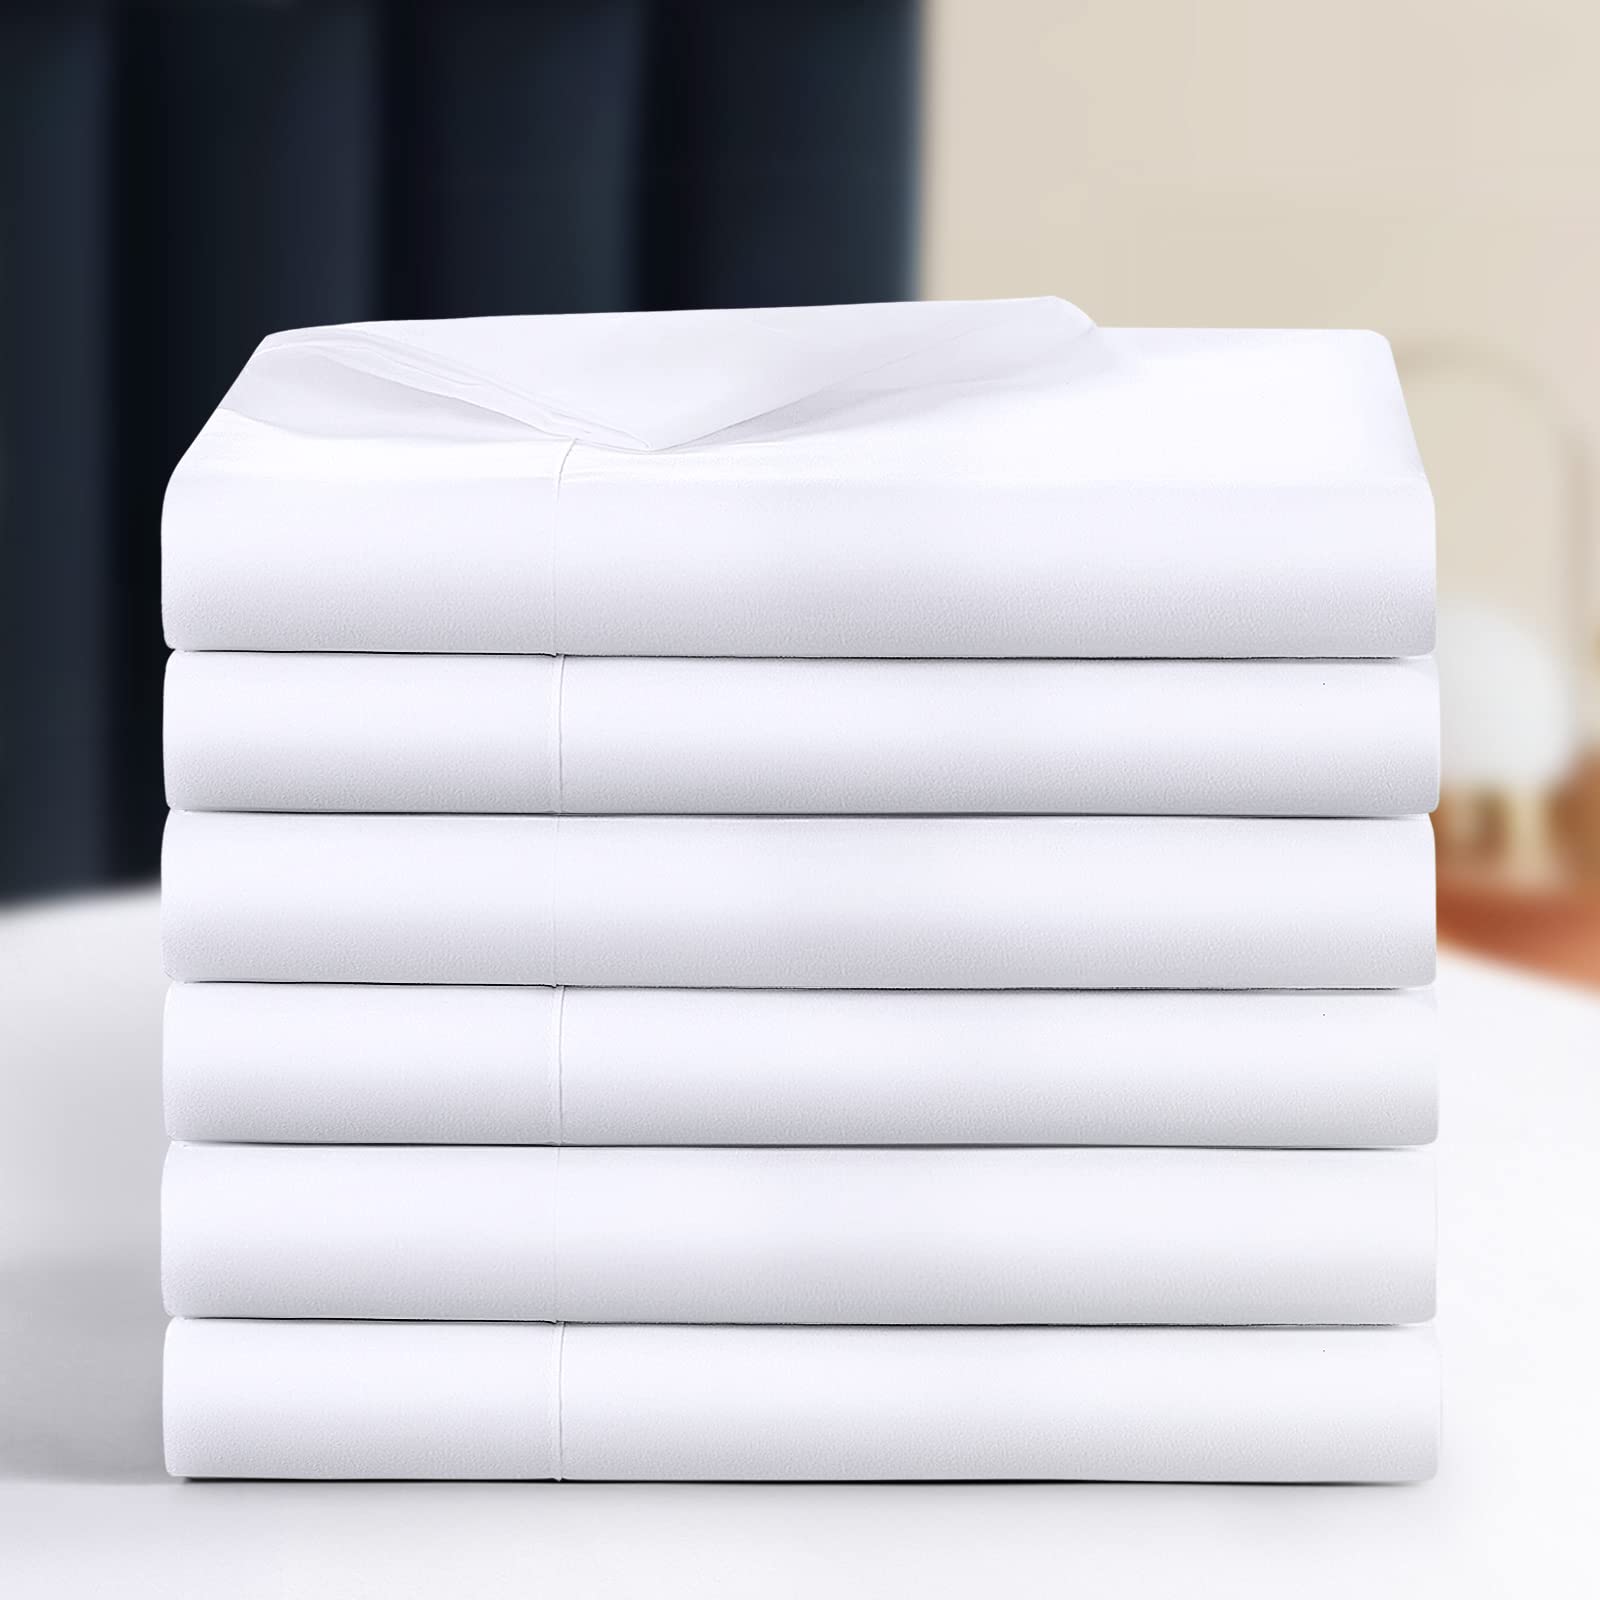 Book Cover Balichun King Flat Sheets (White) - Pack of 6 - Soft Hotel Quality Brushed Microfiber Fabric - Wrinkle & Shrinkage & Fade Resistance Top Sheets for Hotel, Hospital, Massage Use White King Size - 6 Pack（102“x105”）